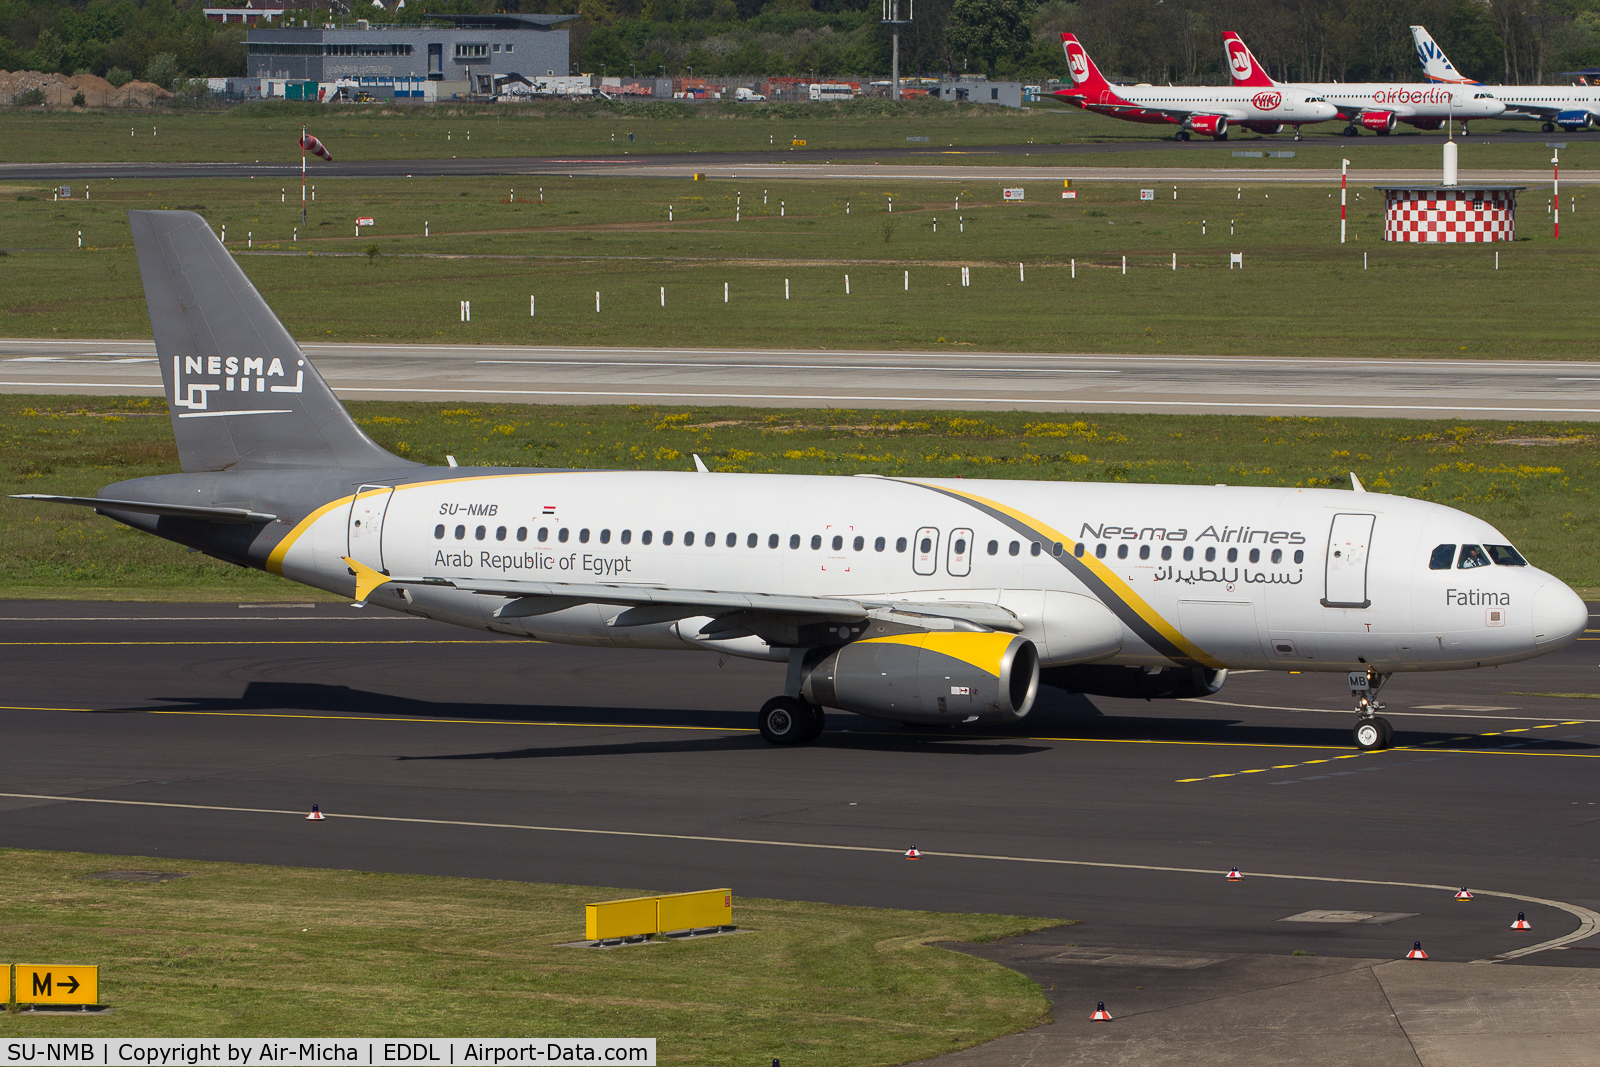 SU-NMB, 2002 Airbus A320-232 C/N 1732, Nesma Airlines